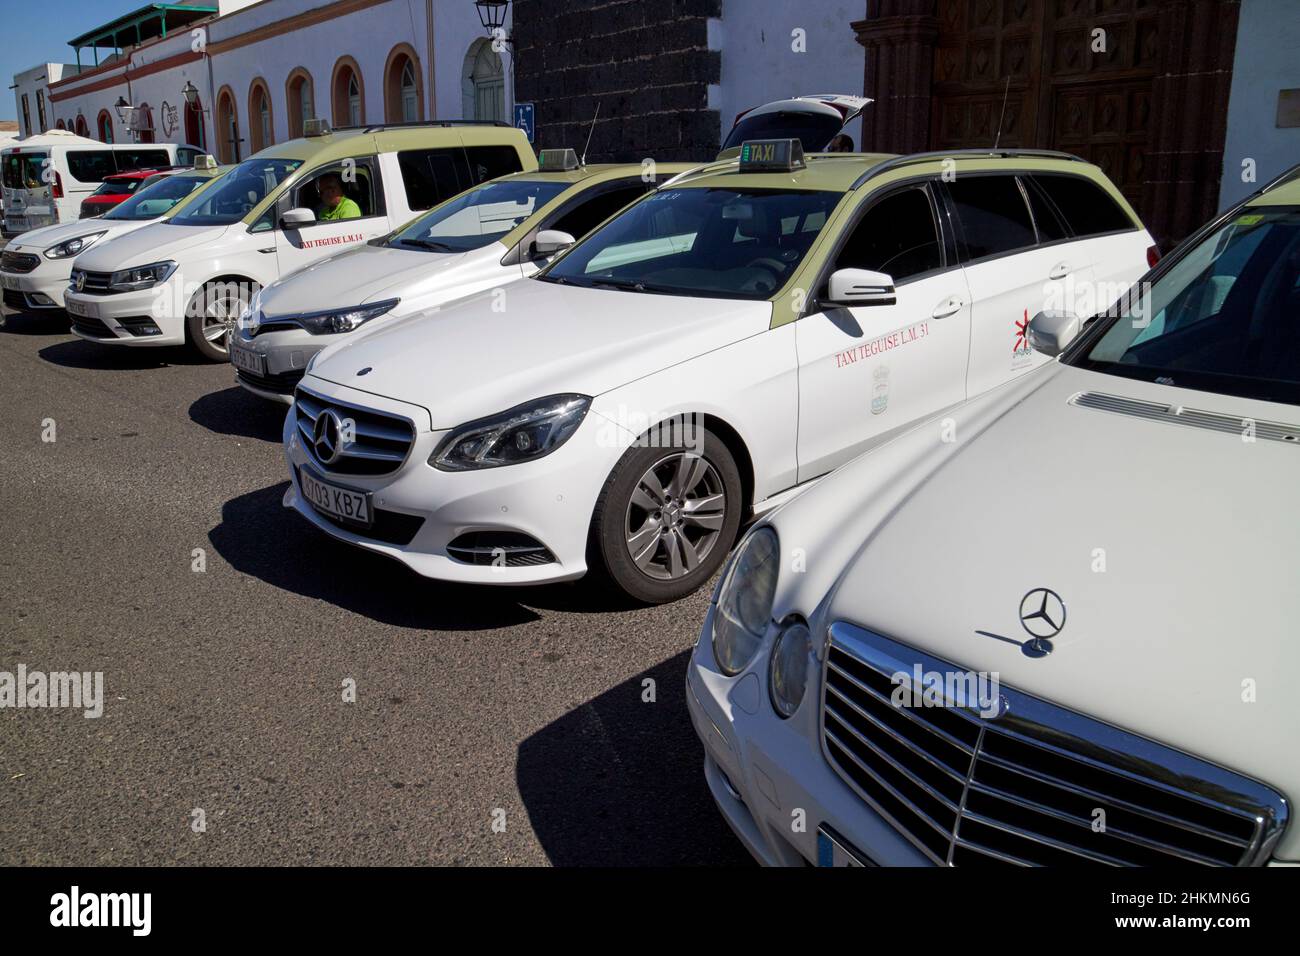 green and white teguise taxis waiting for fares on market day Teguise Lanzarote Canary Islands Spain Stock Photo